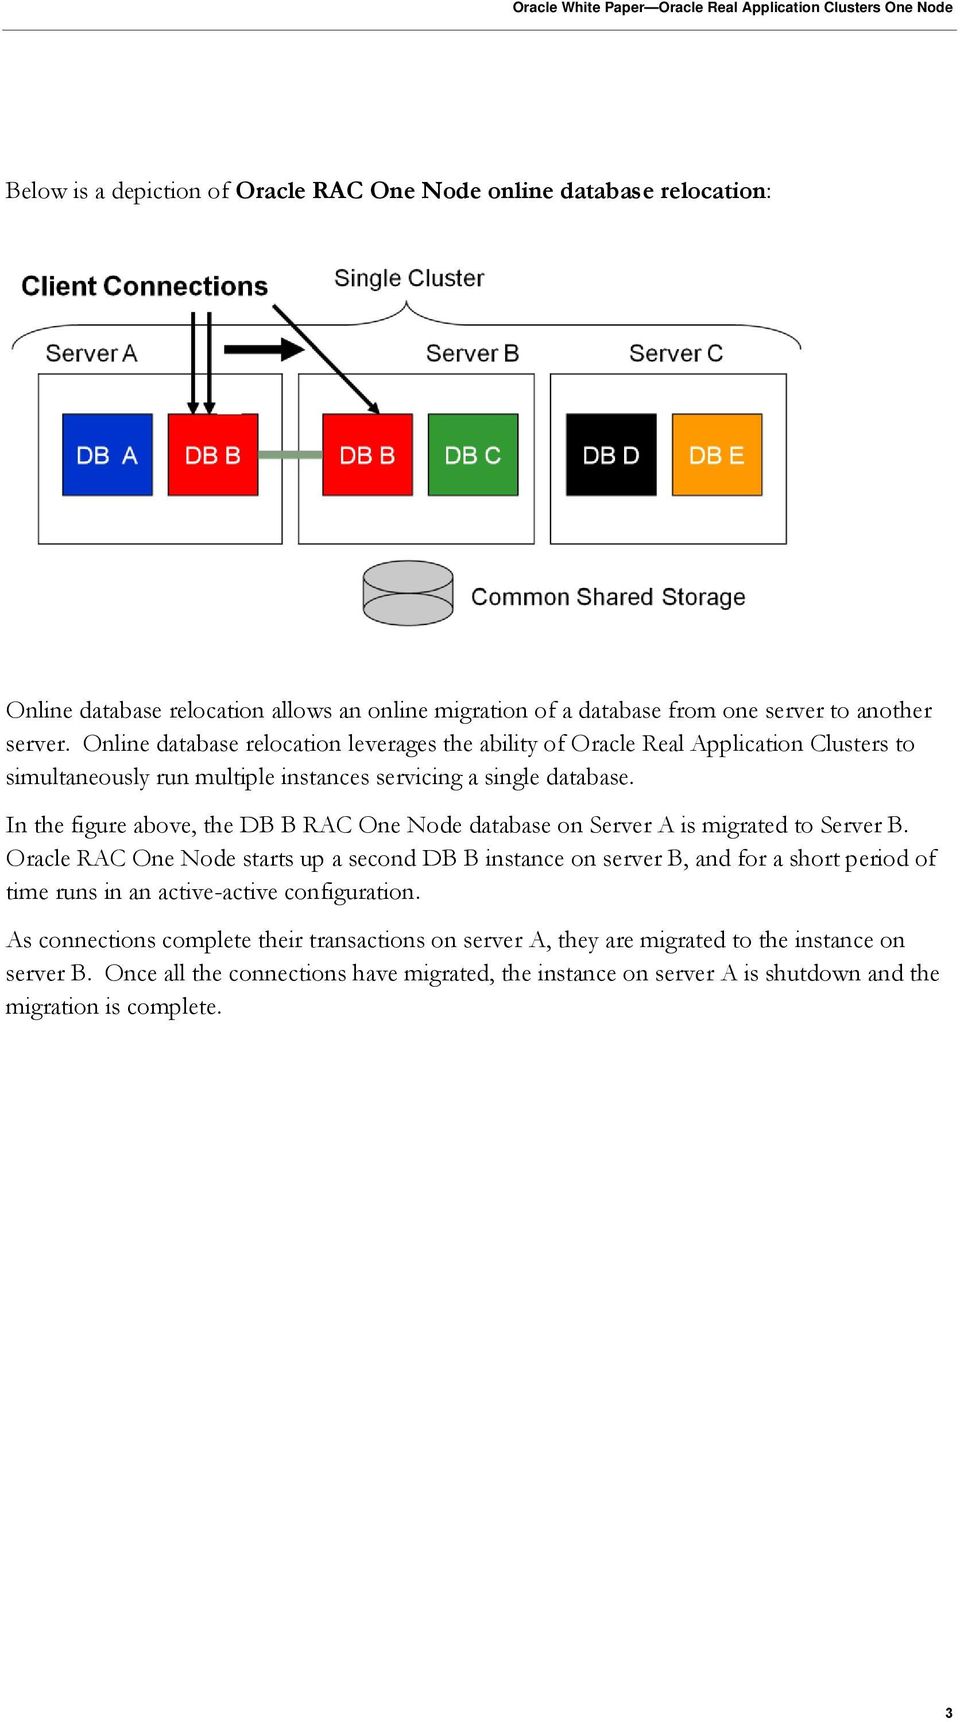 In the figure above, the DB B RAC One Node database on Server A is migrated to Server B.